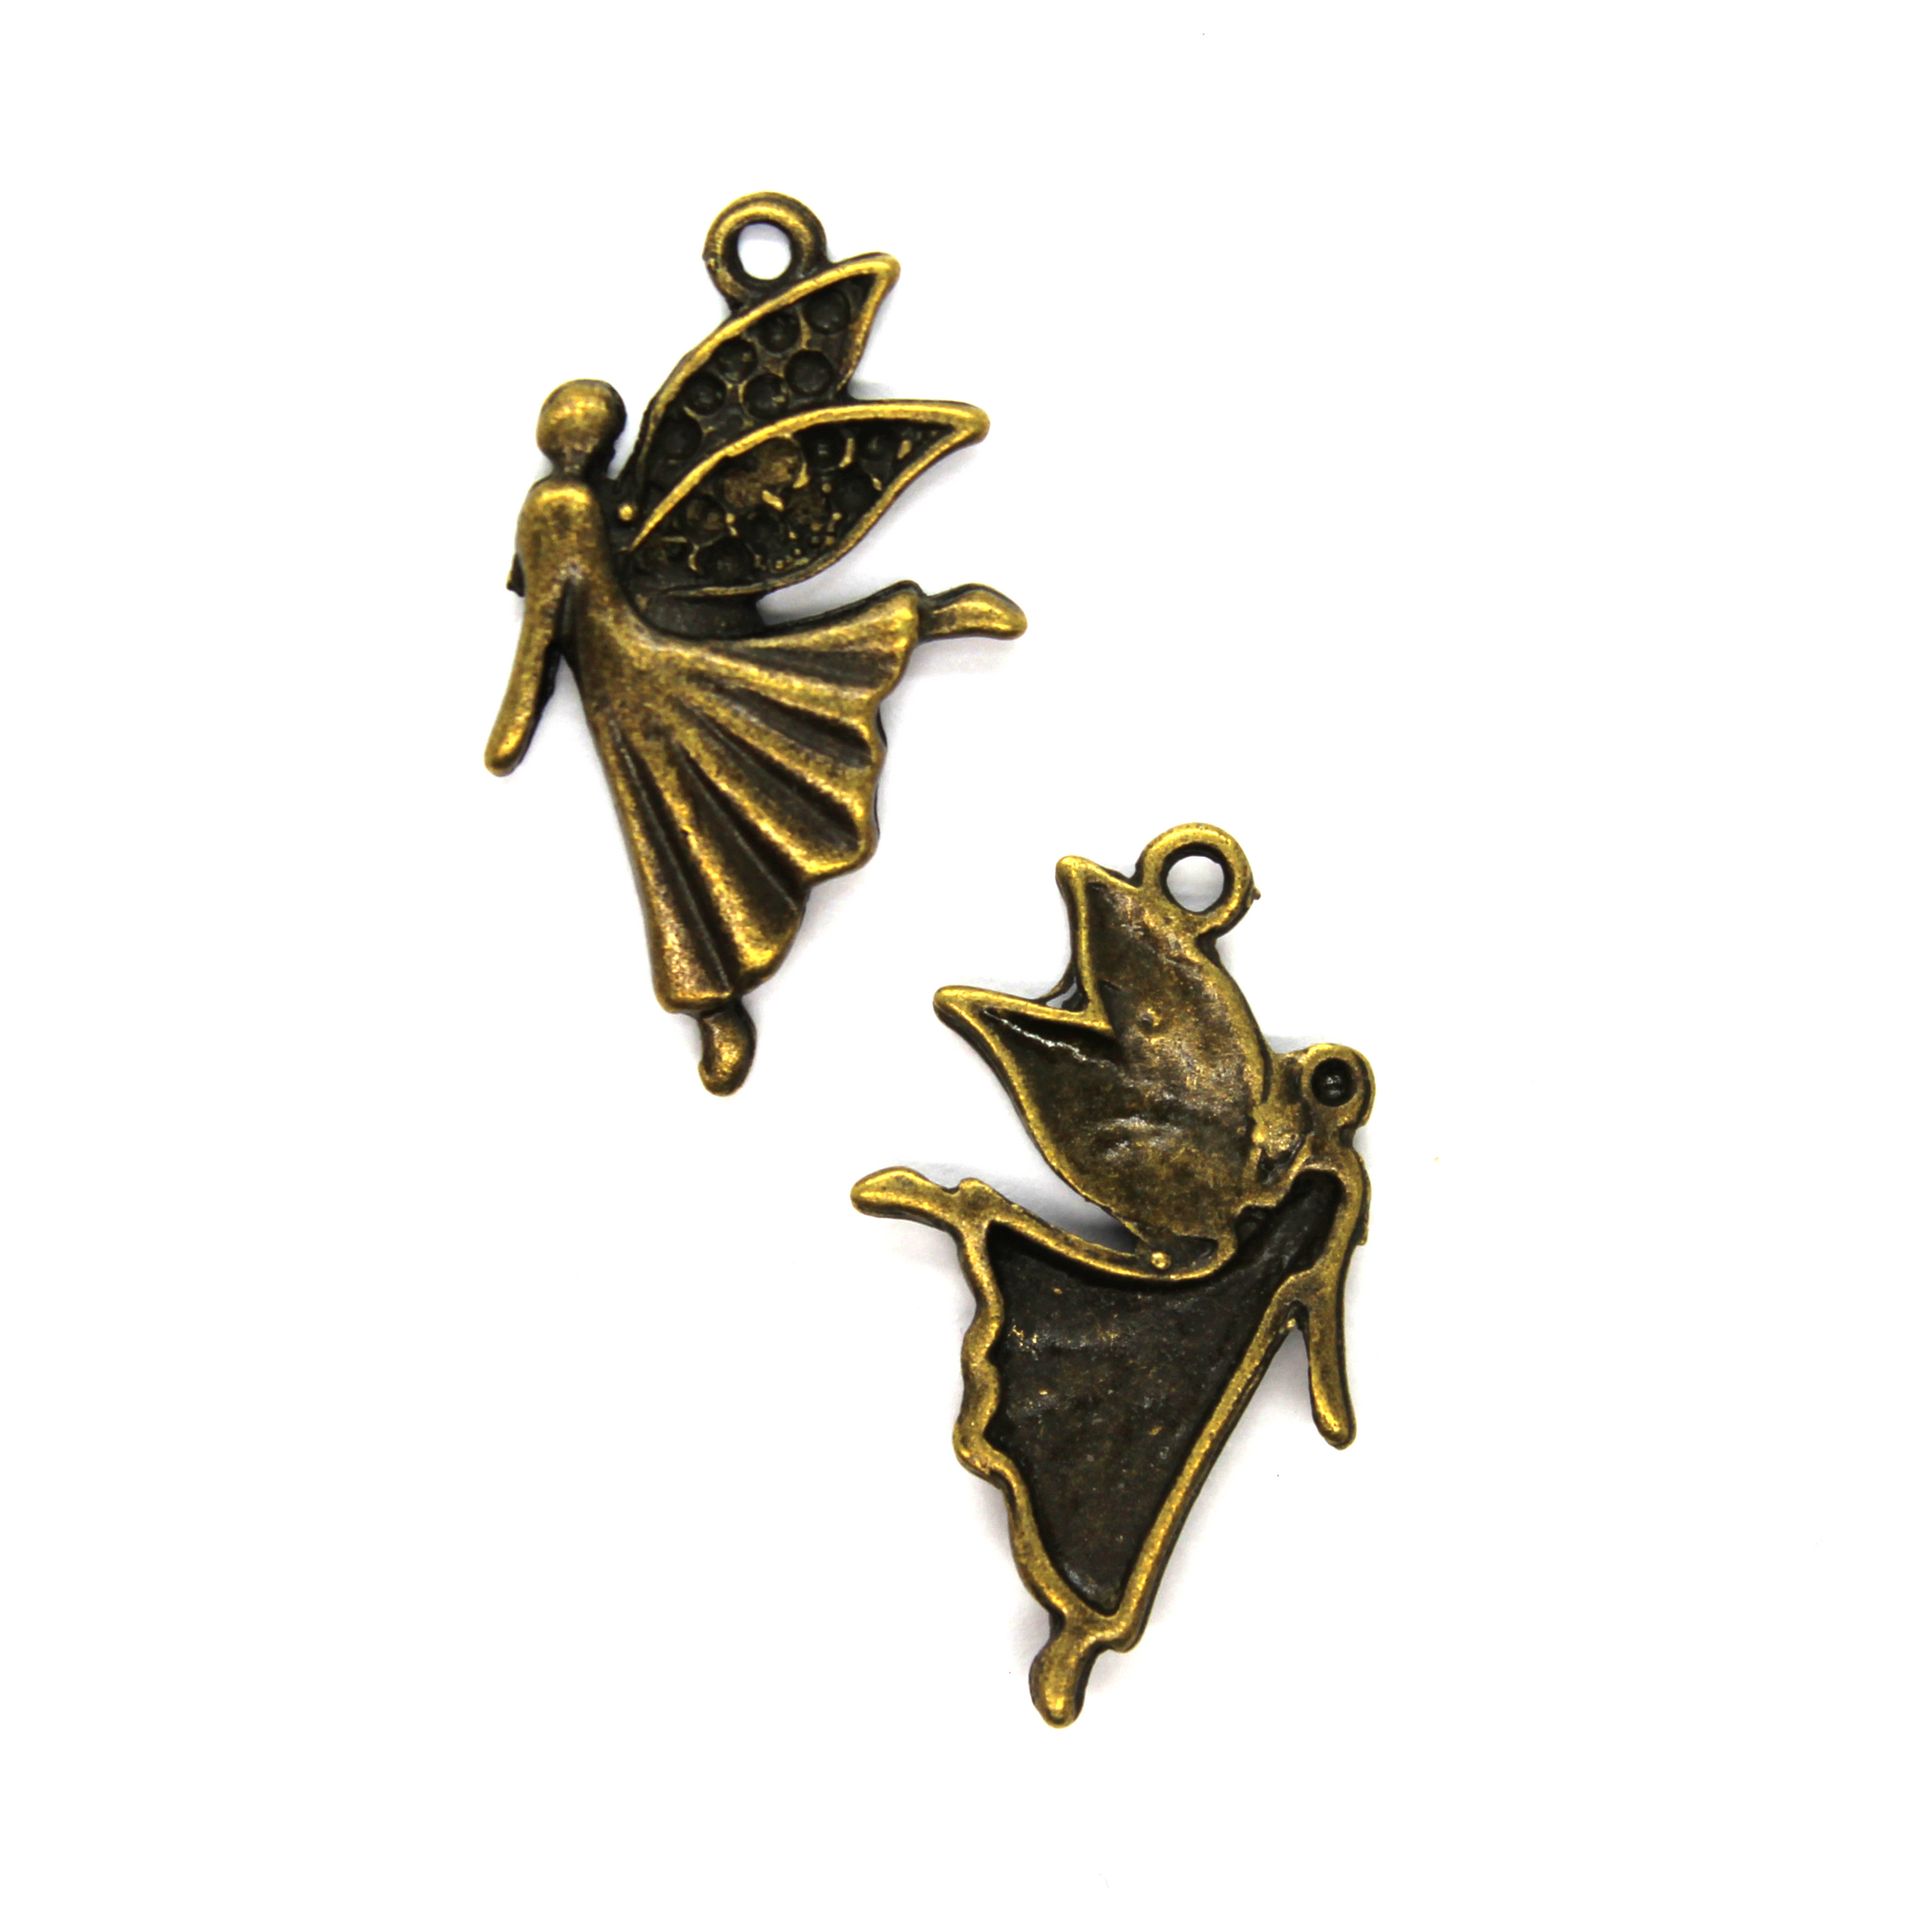 Charms, Fairy, Brass, Alloy, 28mm X 16mm, Sold Per pkg of 6